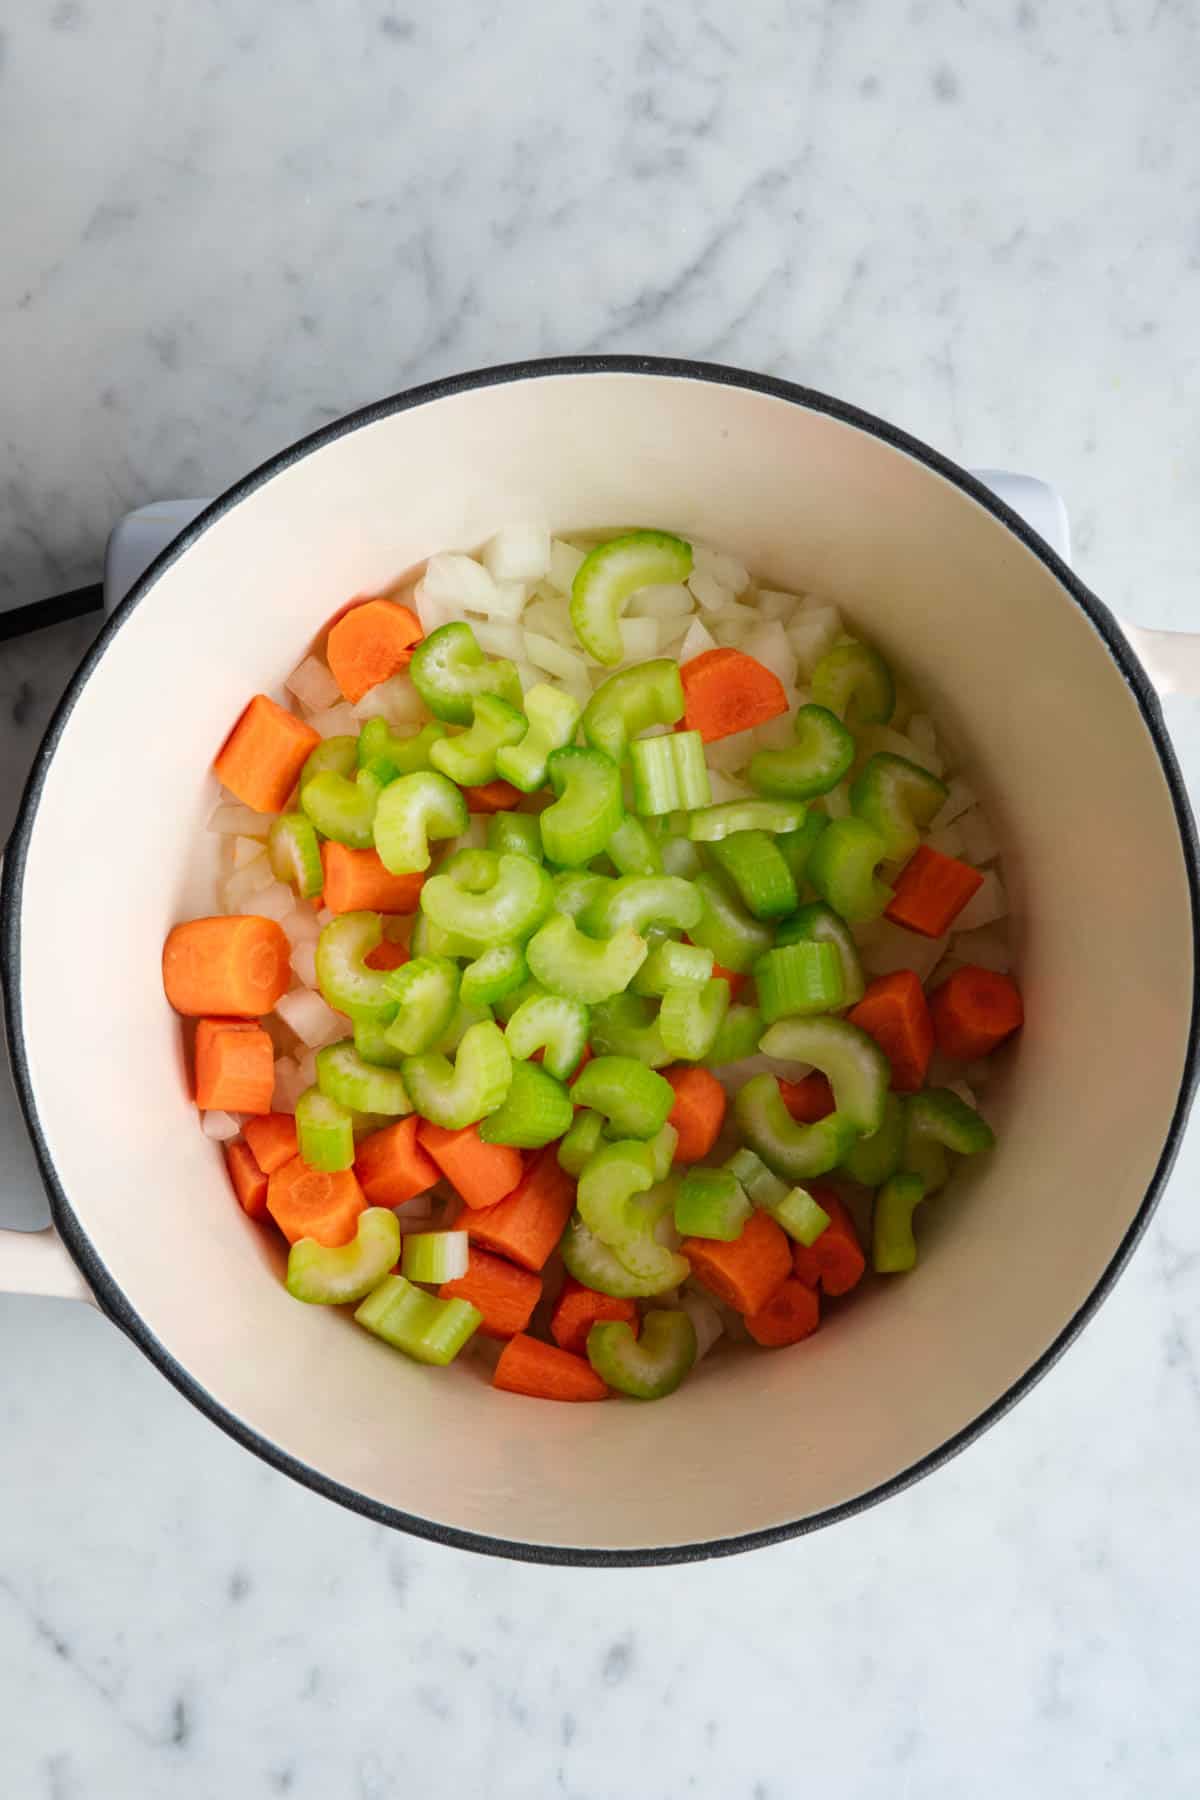 Chopped onion, carrots and celery cooking in a white saucepan.